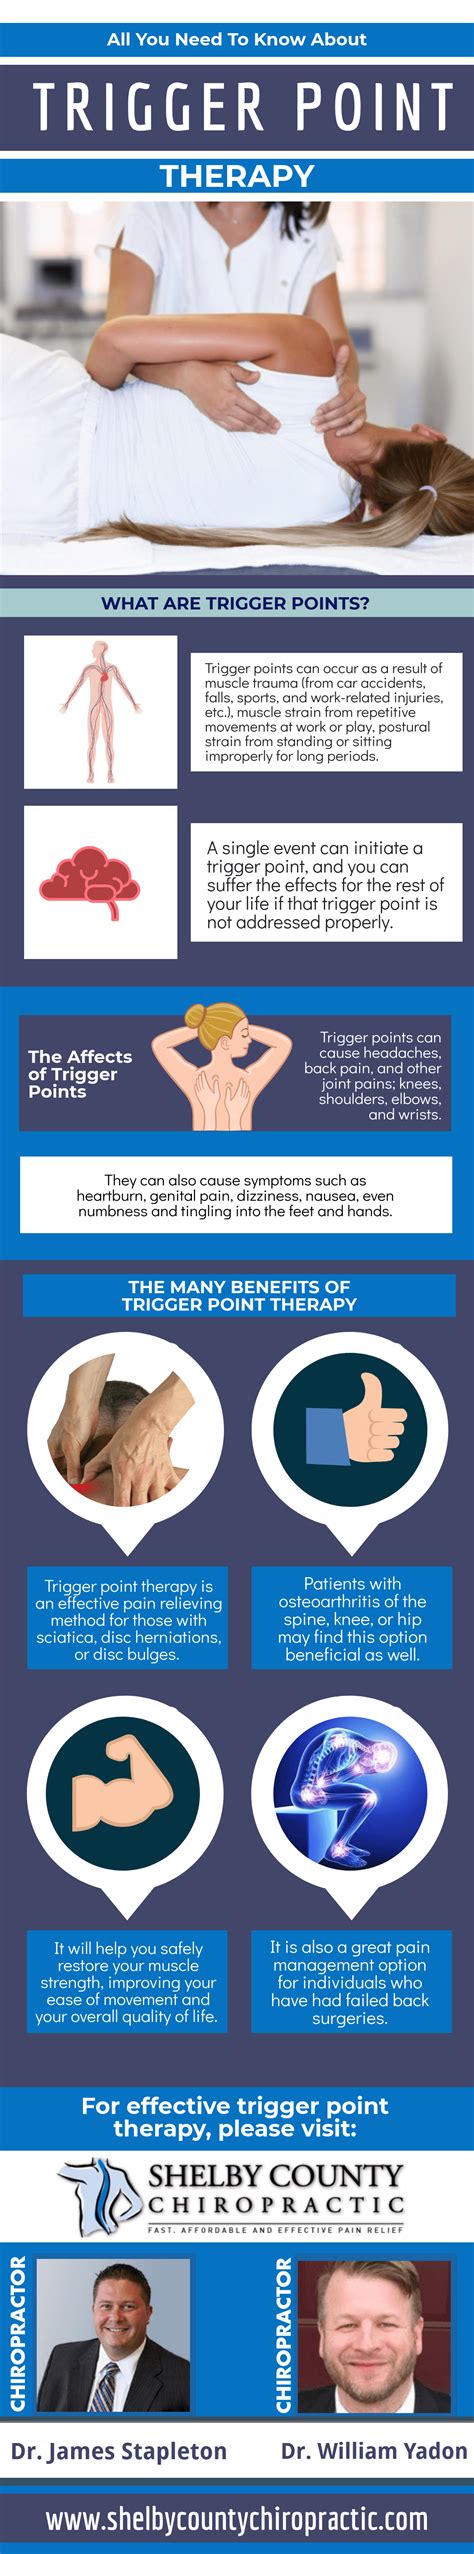 All You Need To Know About Trigger Point Therapy Infographic Shelby County Chiropractic